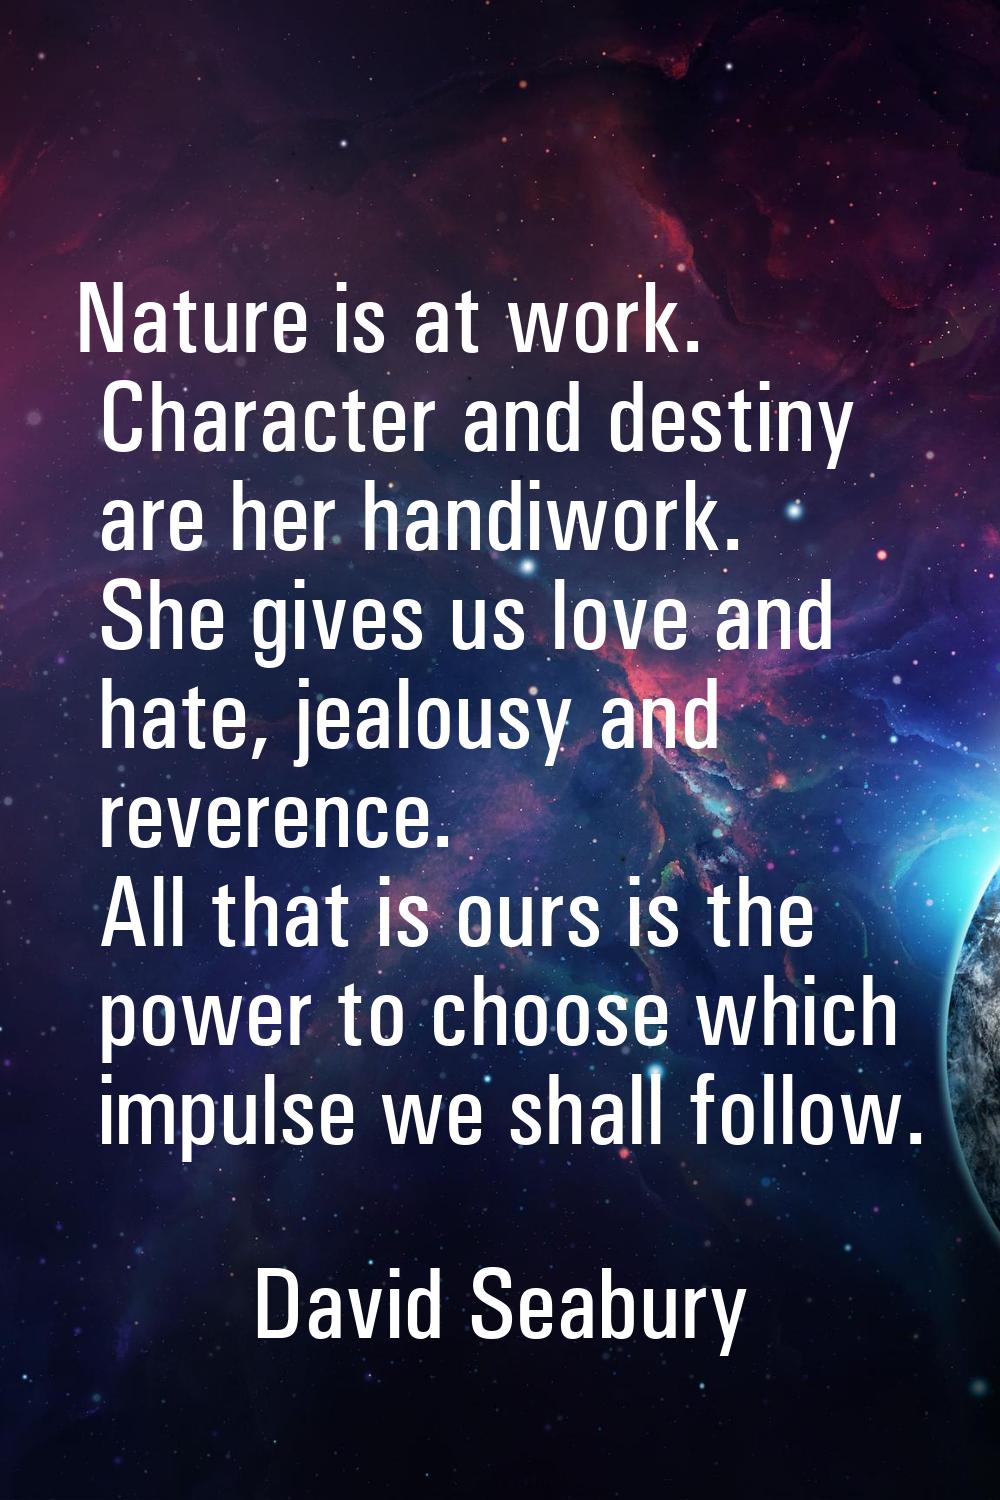 Nature is at work. Character and destiny are her handiwork. She gives us love and hate, jealousy an